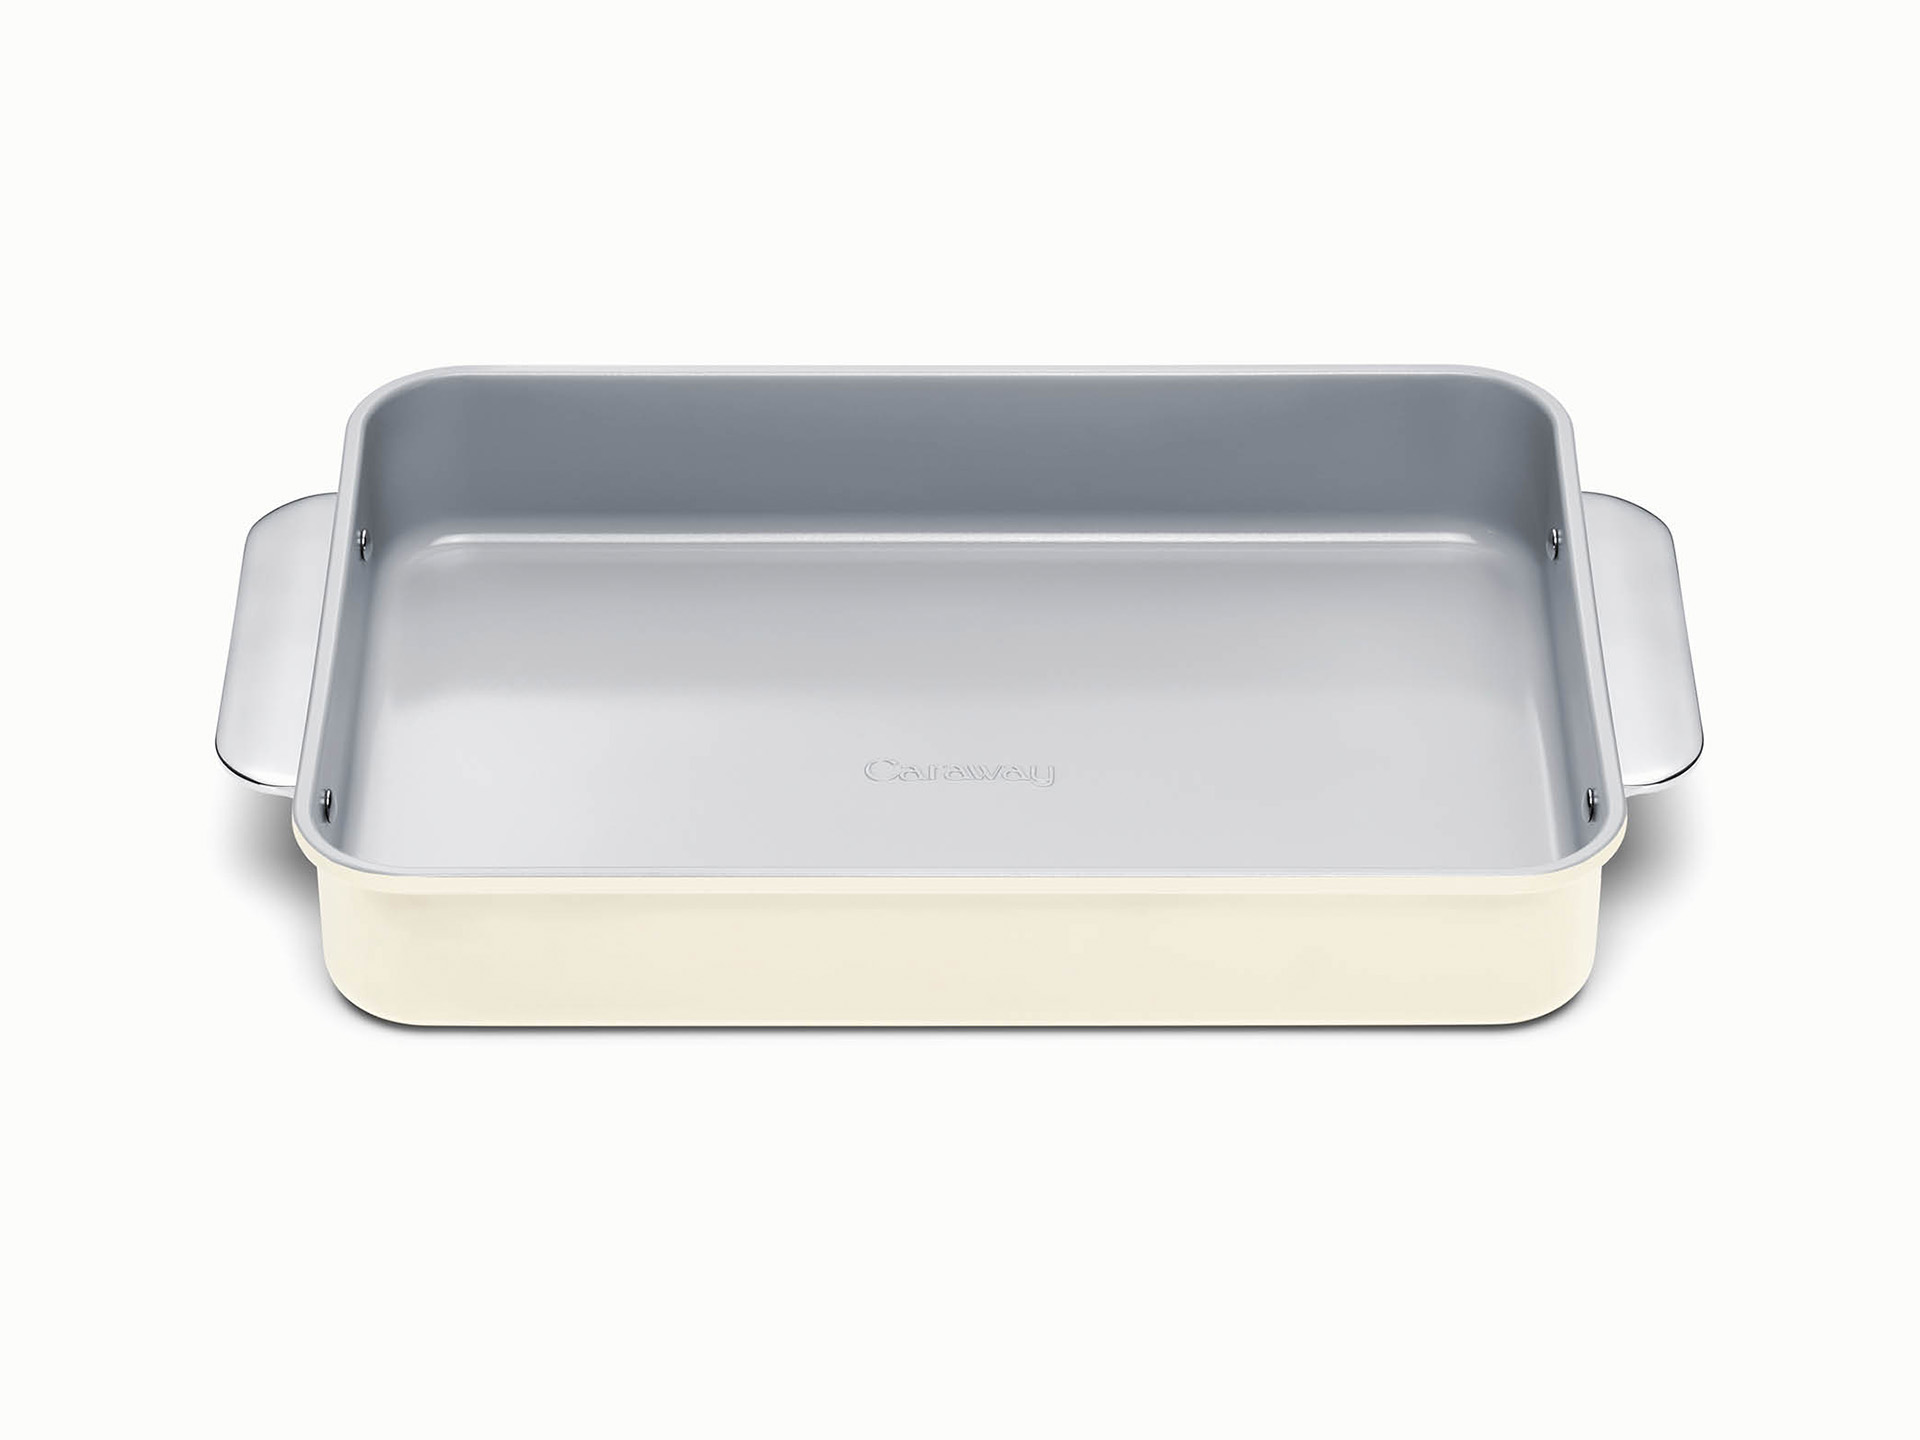  LeGourmet Nonstick Rectangle Baking Pan 9x13 Inch, Ceramic  Coating, Non-Toxic, Rust Resistant Aluminized Steel, Perfect Baking Dish  for Brownie Cake, Roasting, Lasagna - Butter: Home & Kitchen